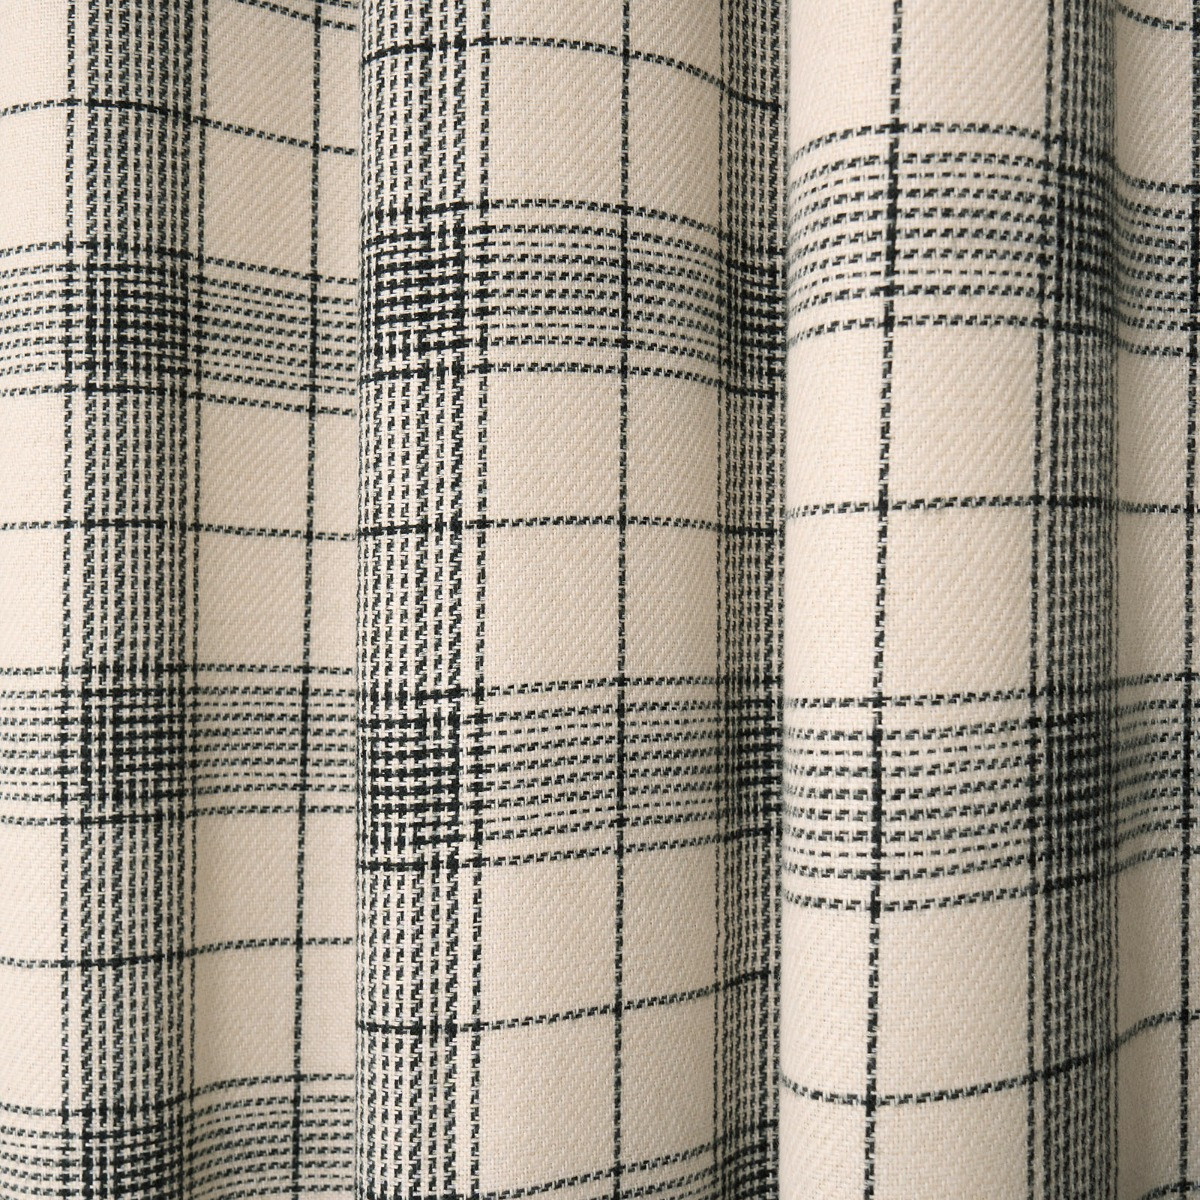 OHS Woven Check Eyelet Curtains - Cream>